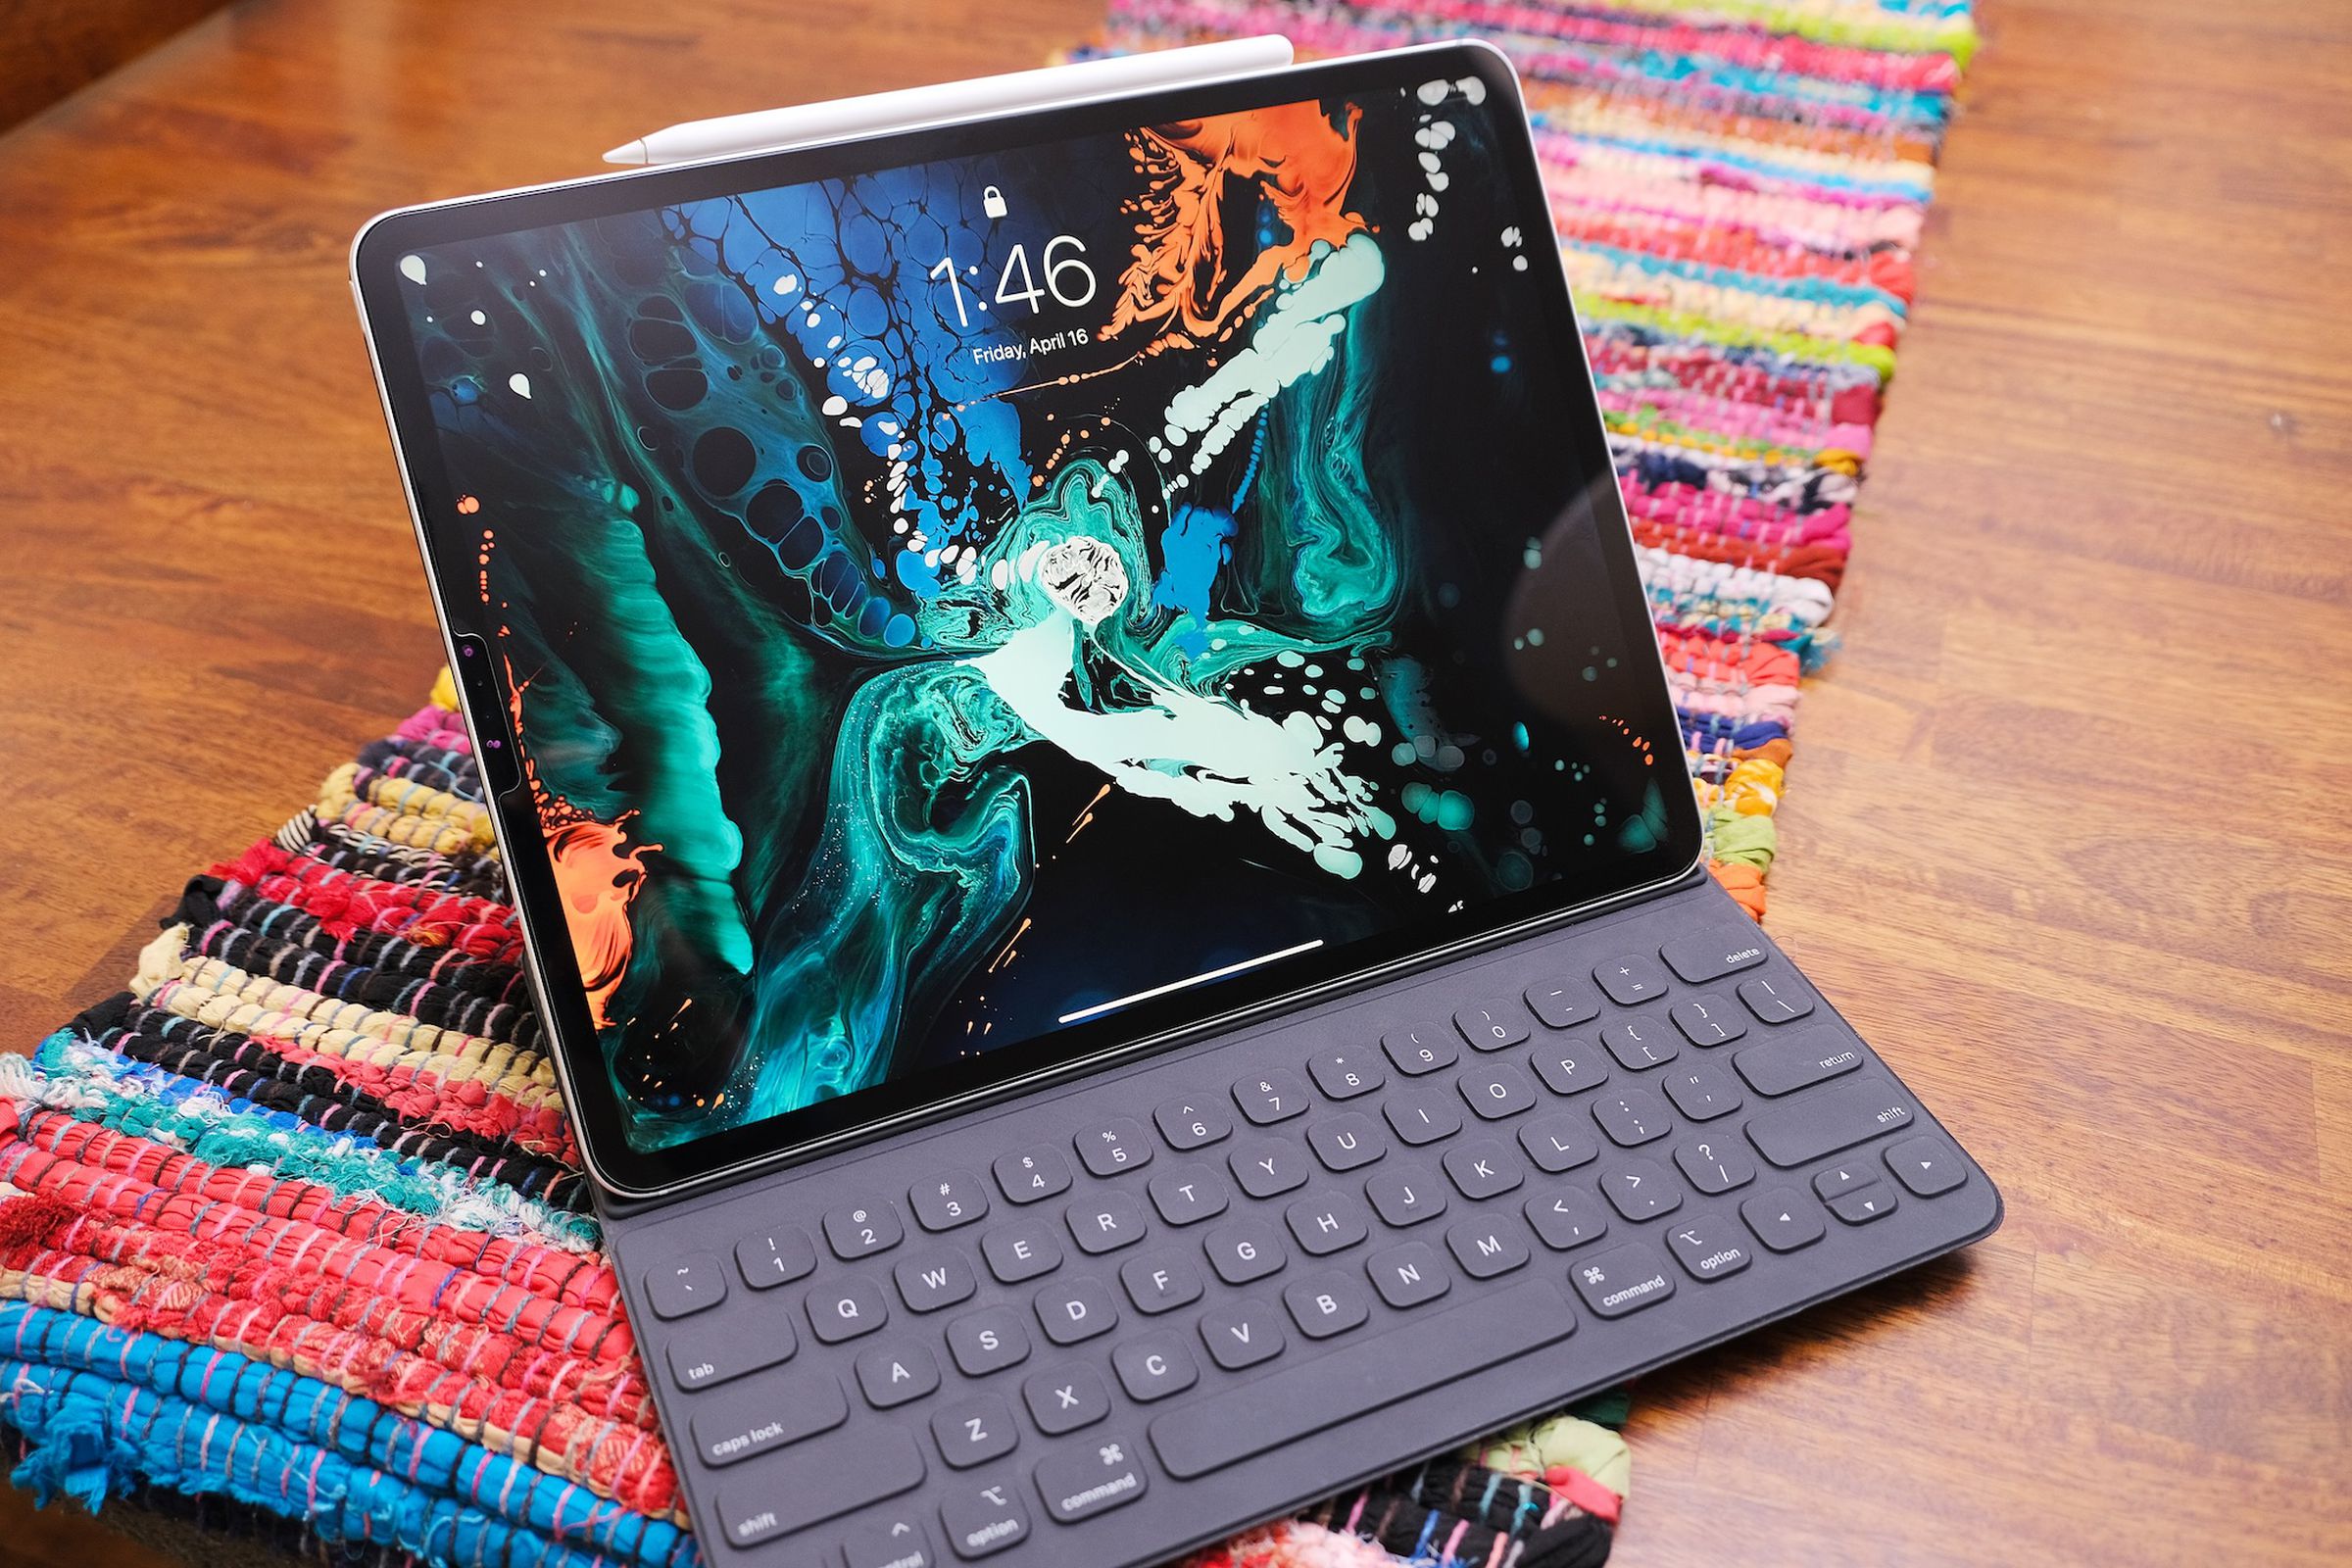 An image of Apple’s Smart Keyboard Folio attached to an M1 iPad Pro.